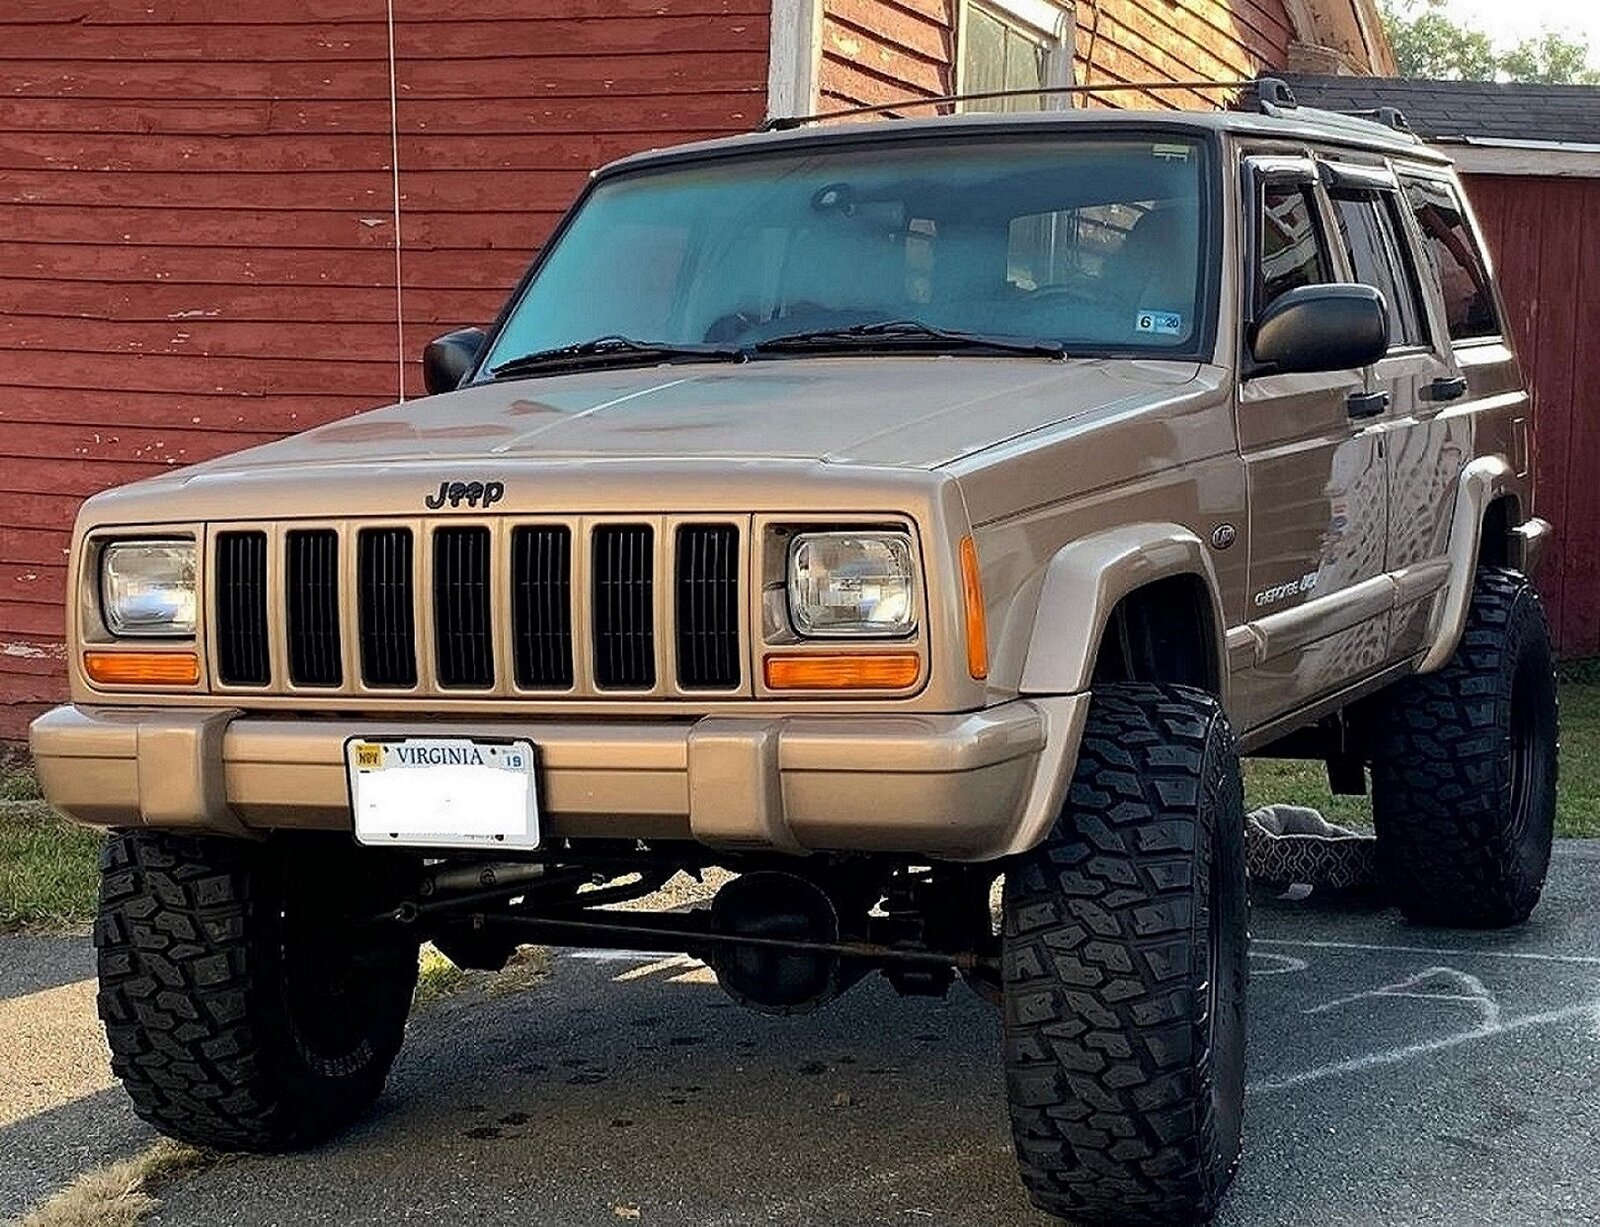 Suggestions on new tires and wheels (33x12.50R15) Jeep